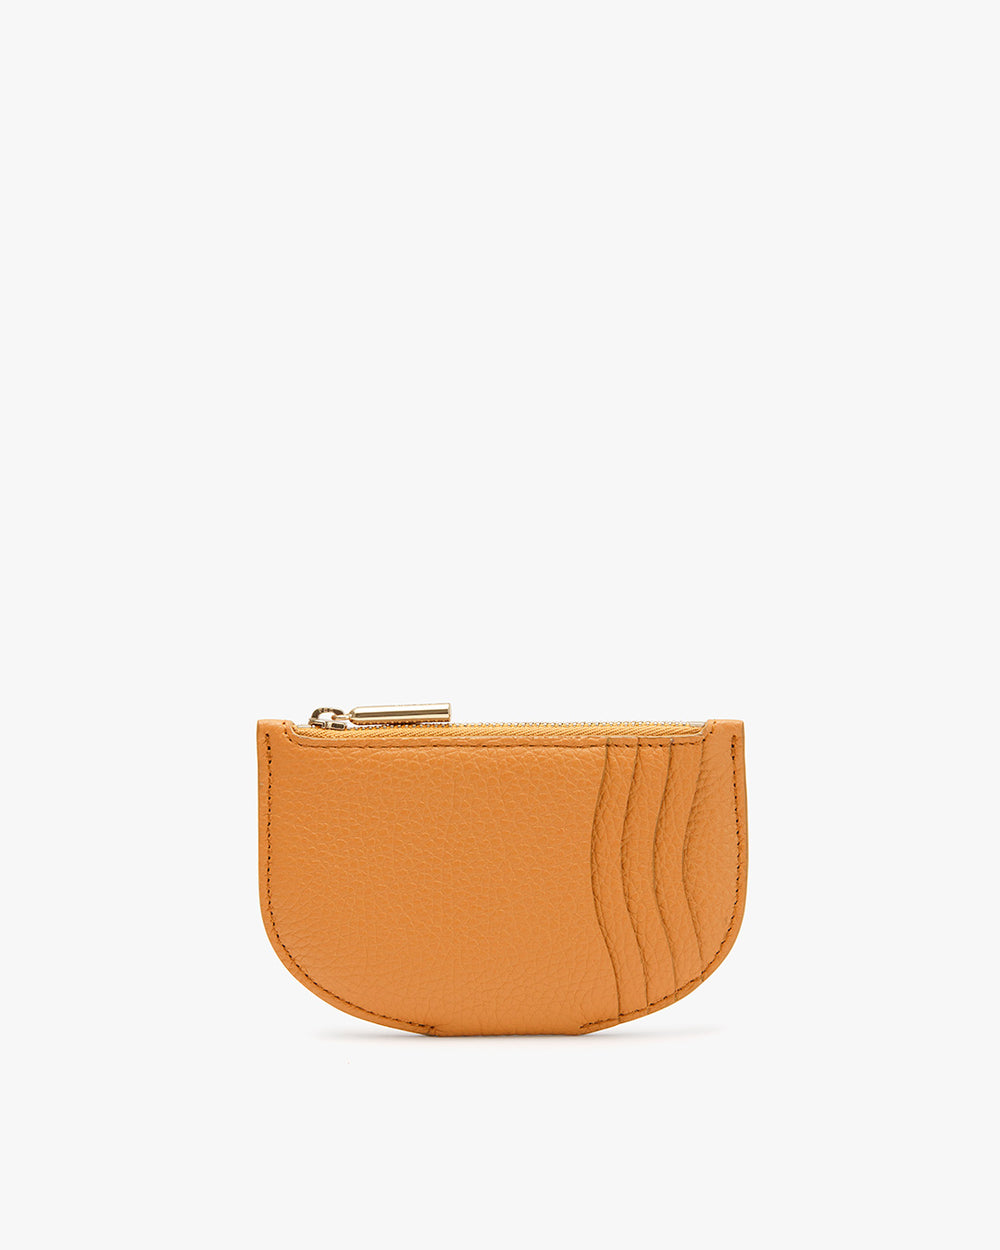 Small textured purse with zipper on a plain background.